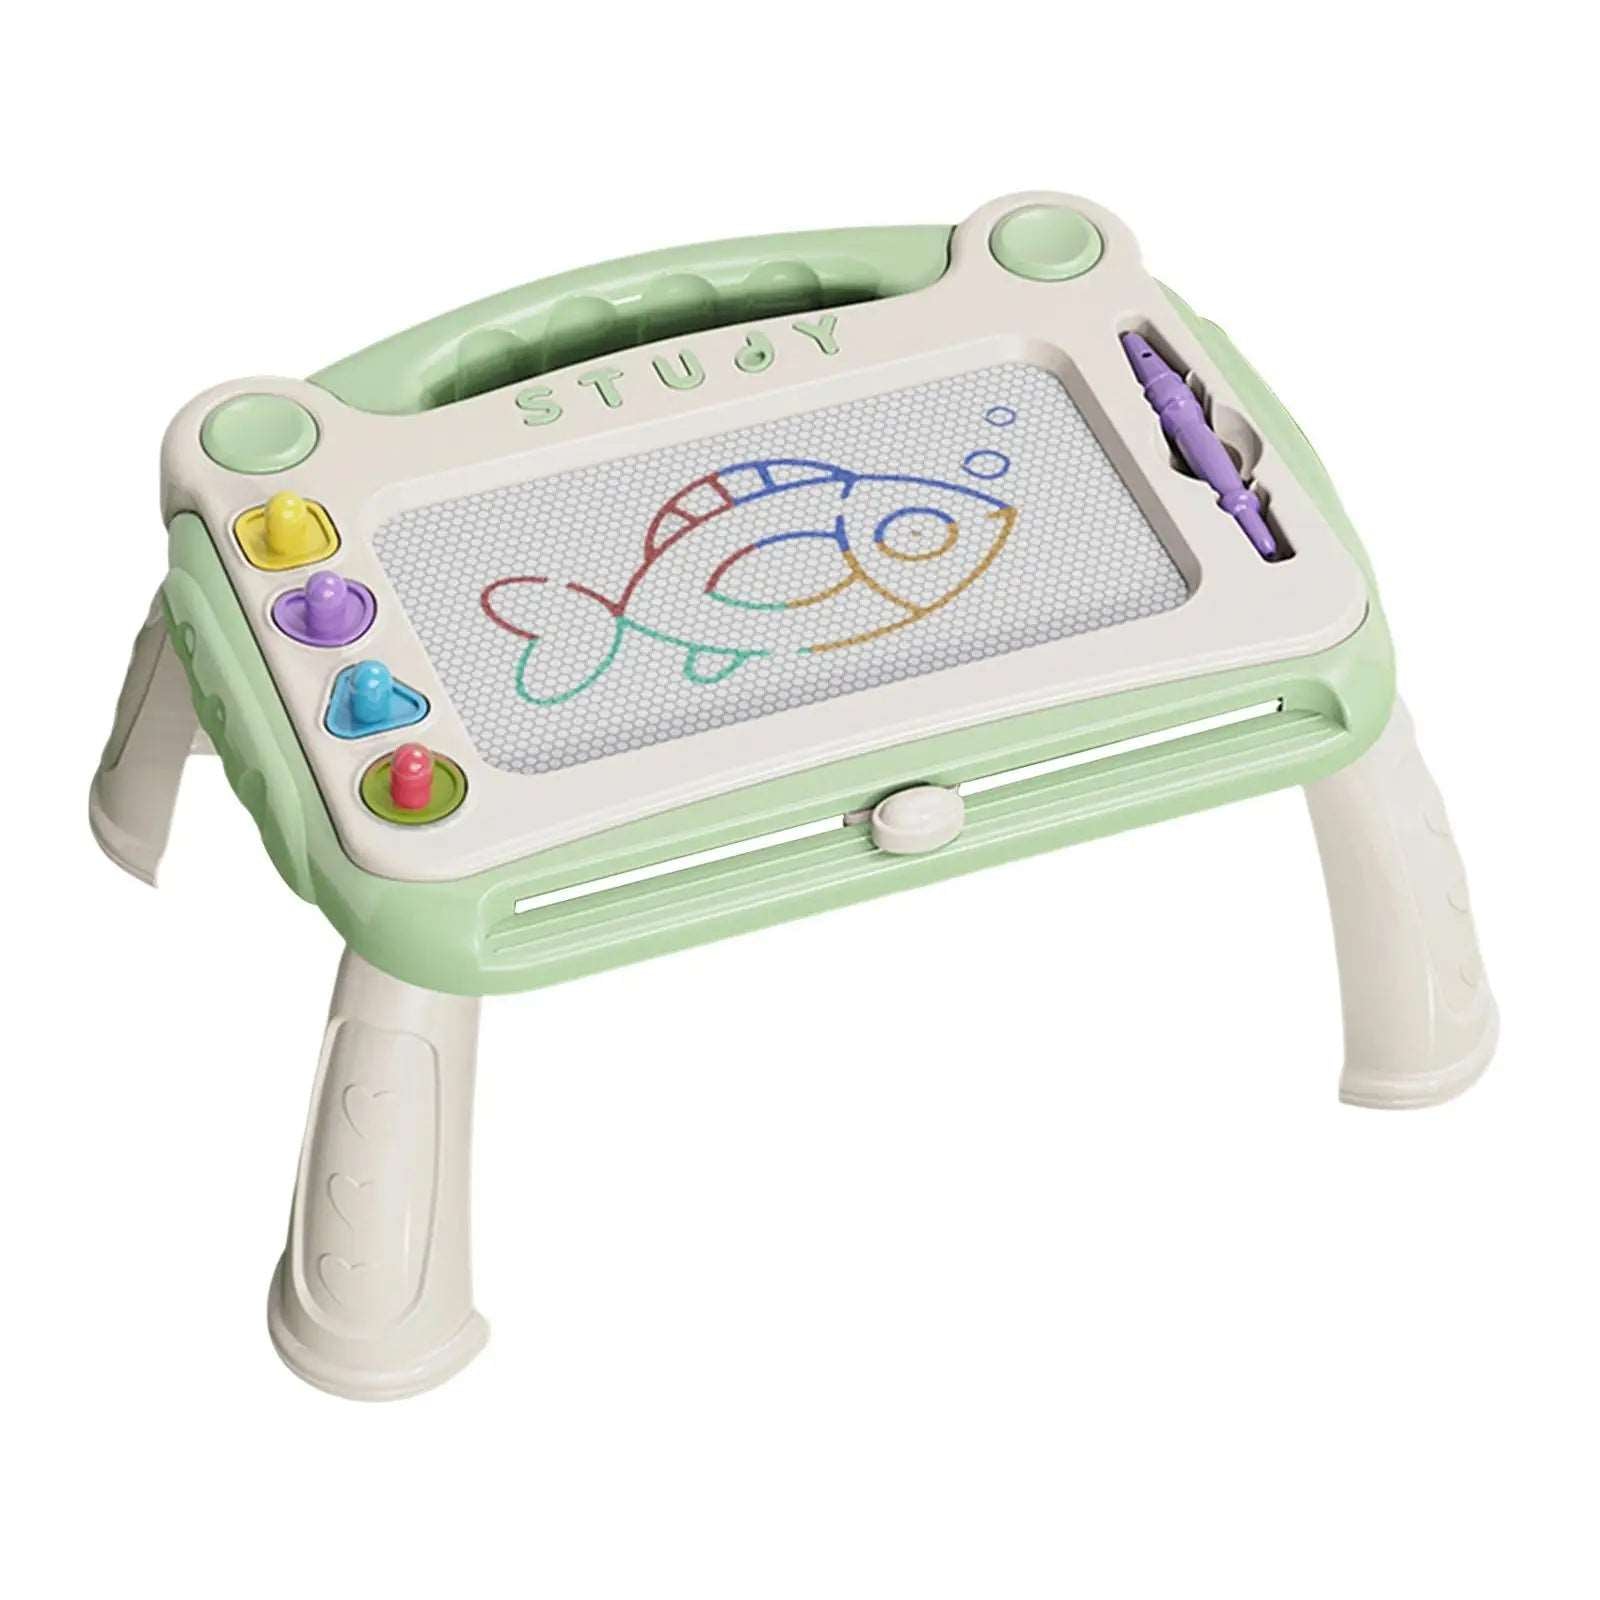 "Creative Kids' Etch Table Sketch Pad for Learning and Play" - ToylandEU